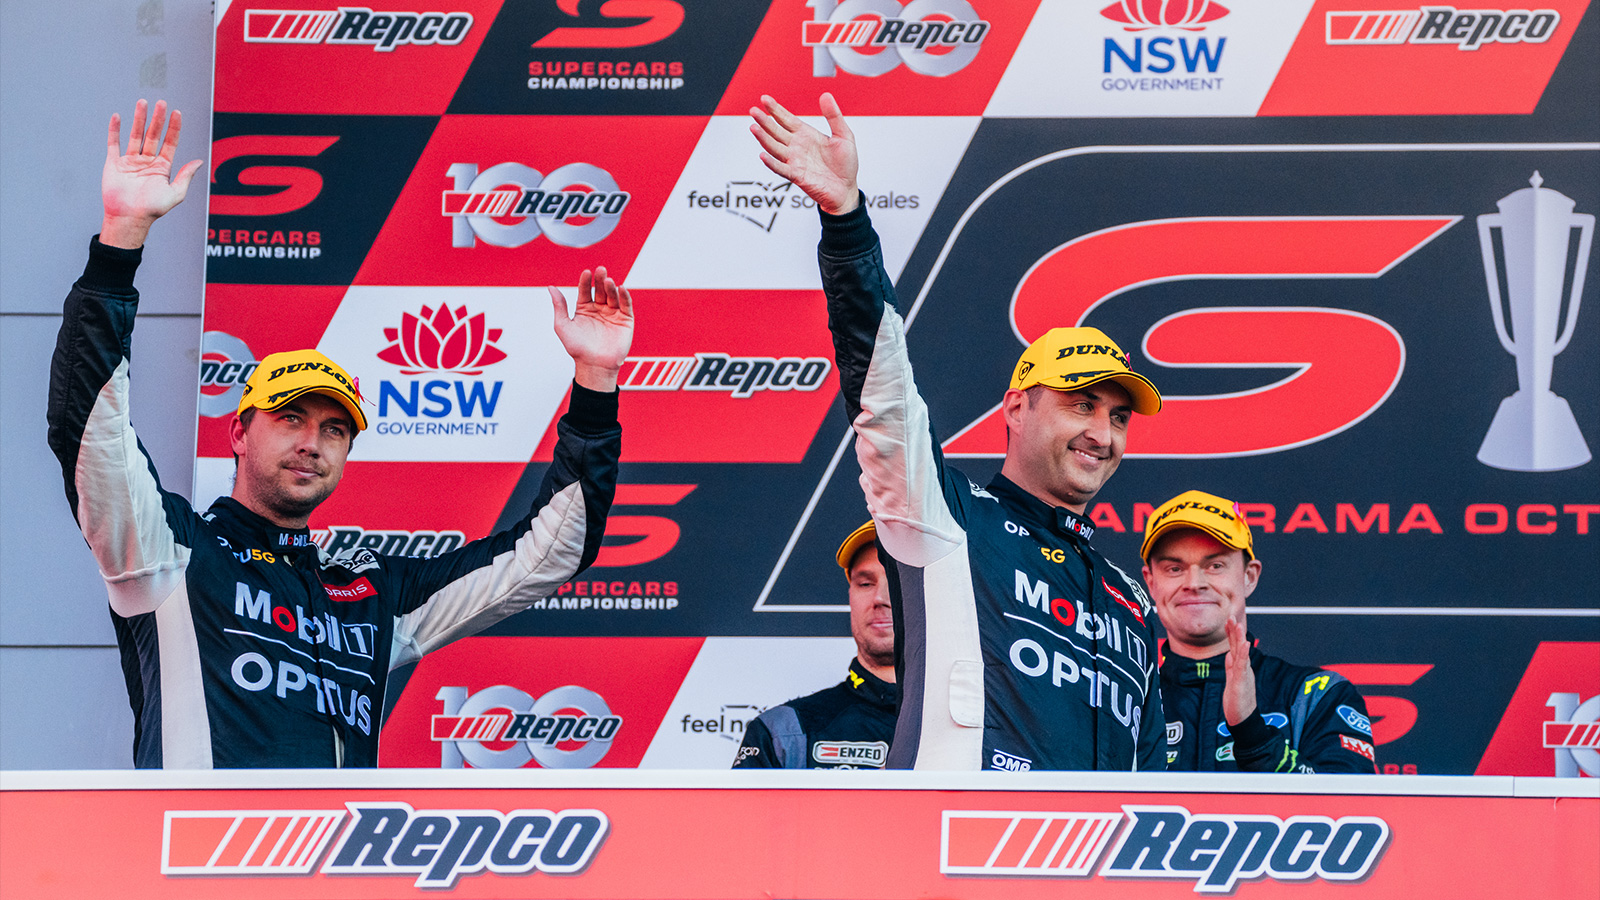 2nd for Mostert and Coulthard at Bathurst